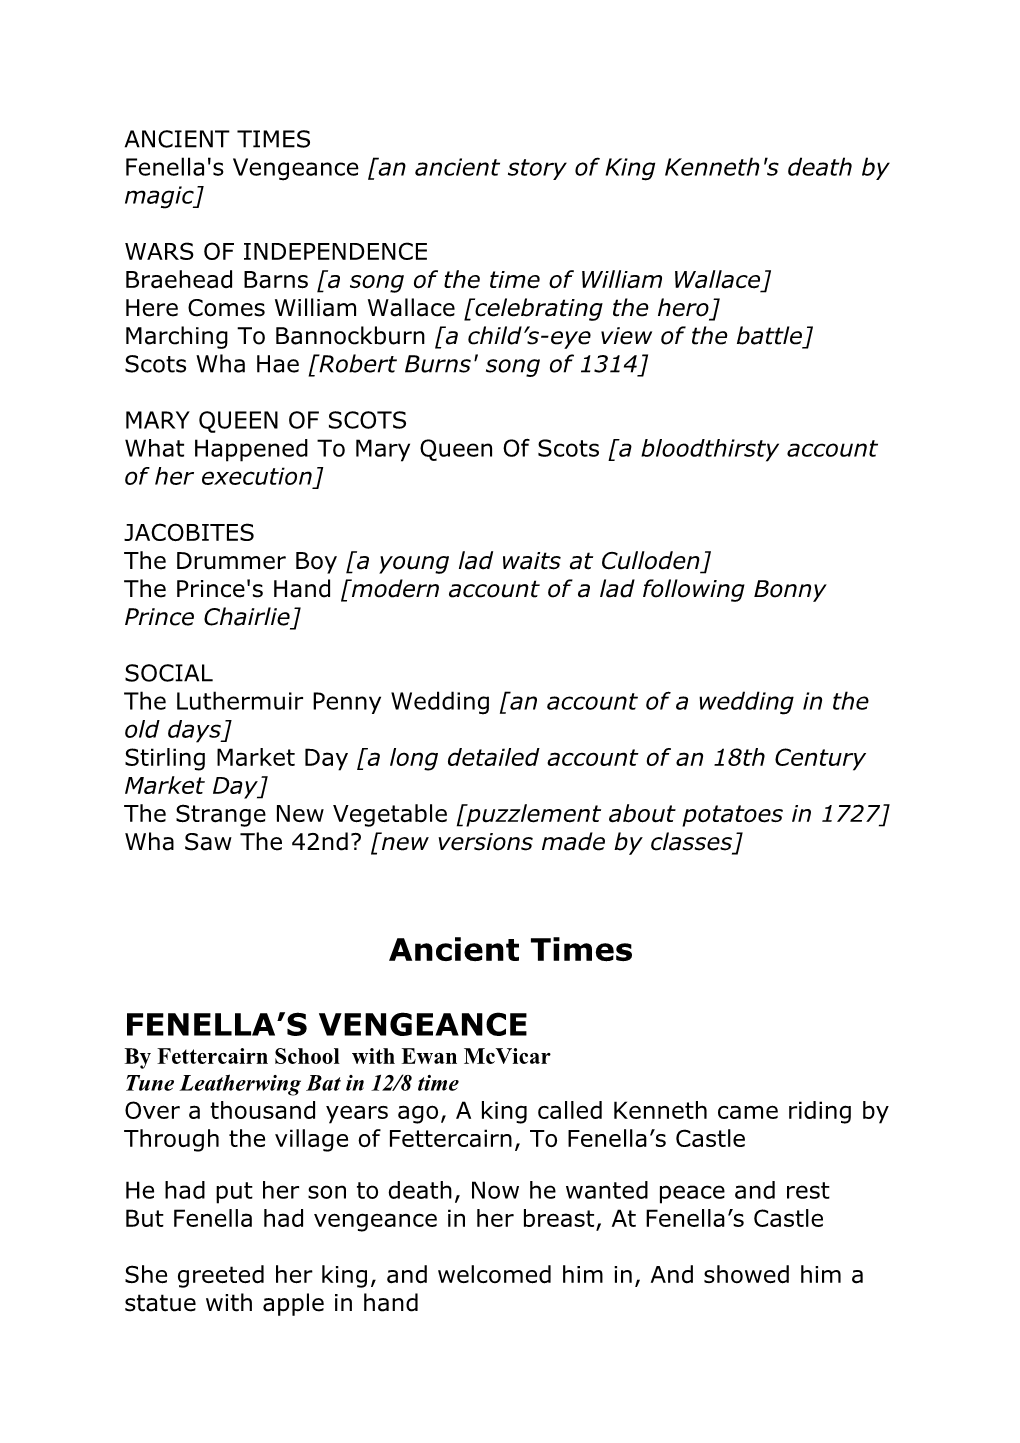 Fenella's Vengeance an Ancient Story of King Kenneth's Death by Magic